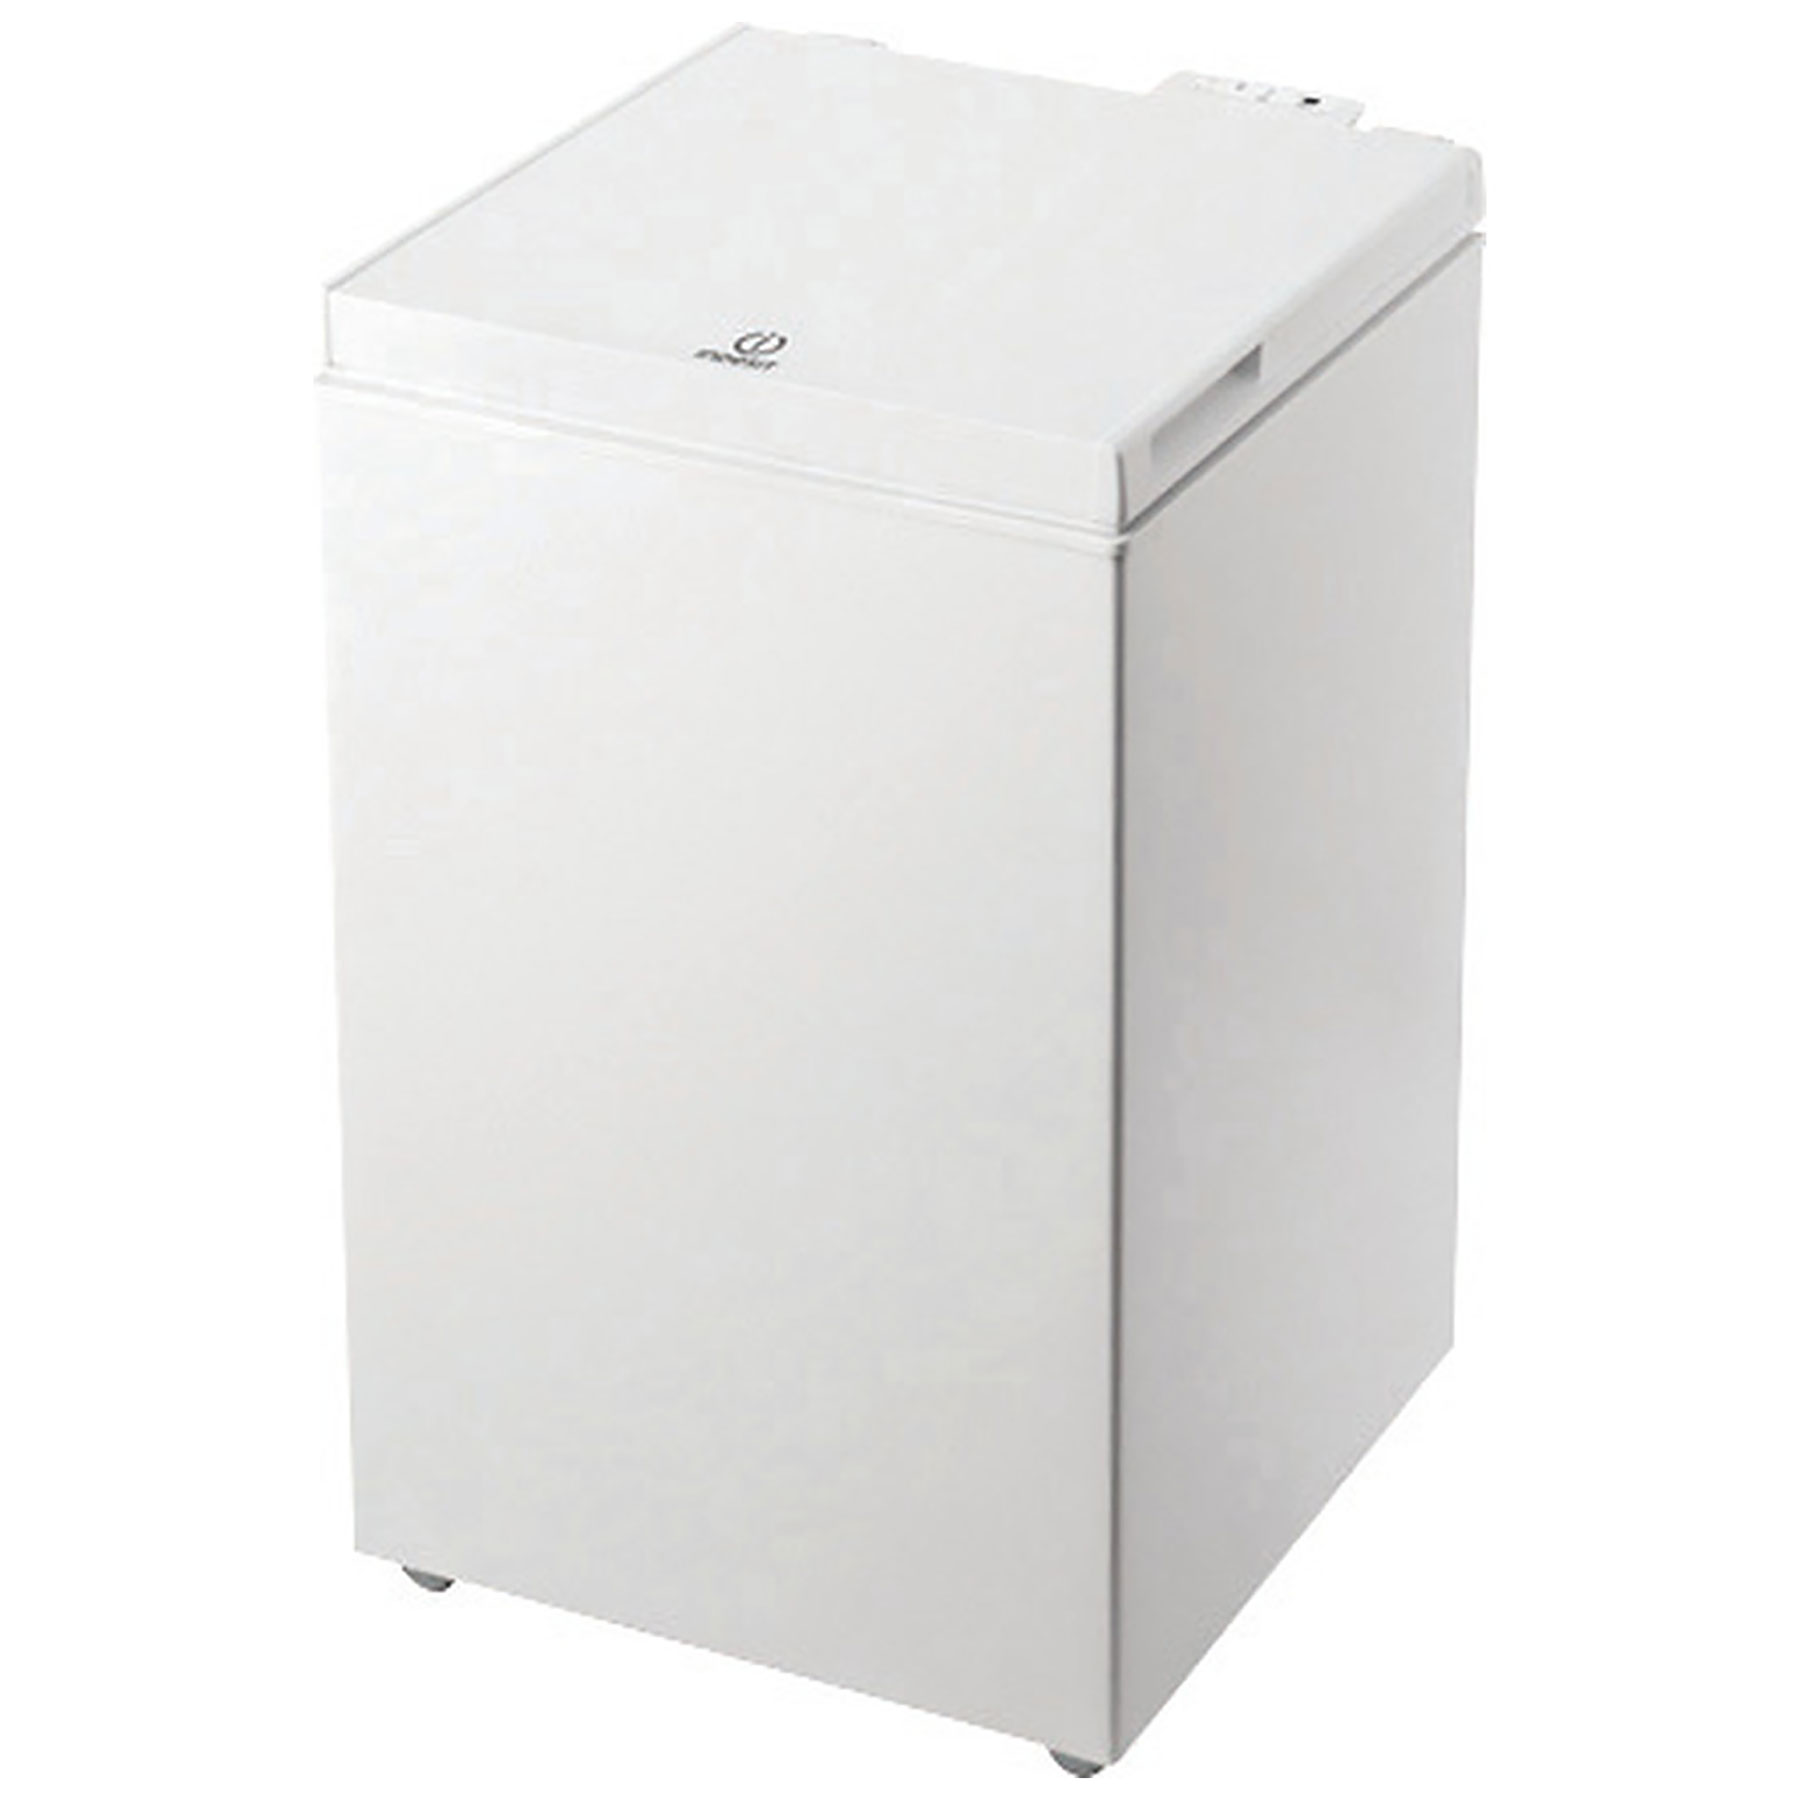 Photos - Freezer Indesit OS2A10022 53cm Chest  in White 99 Litre 0 86m 